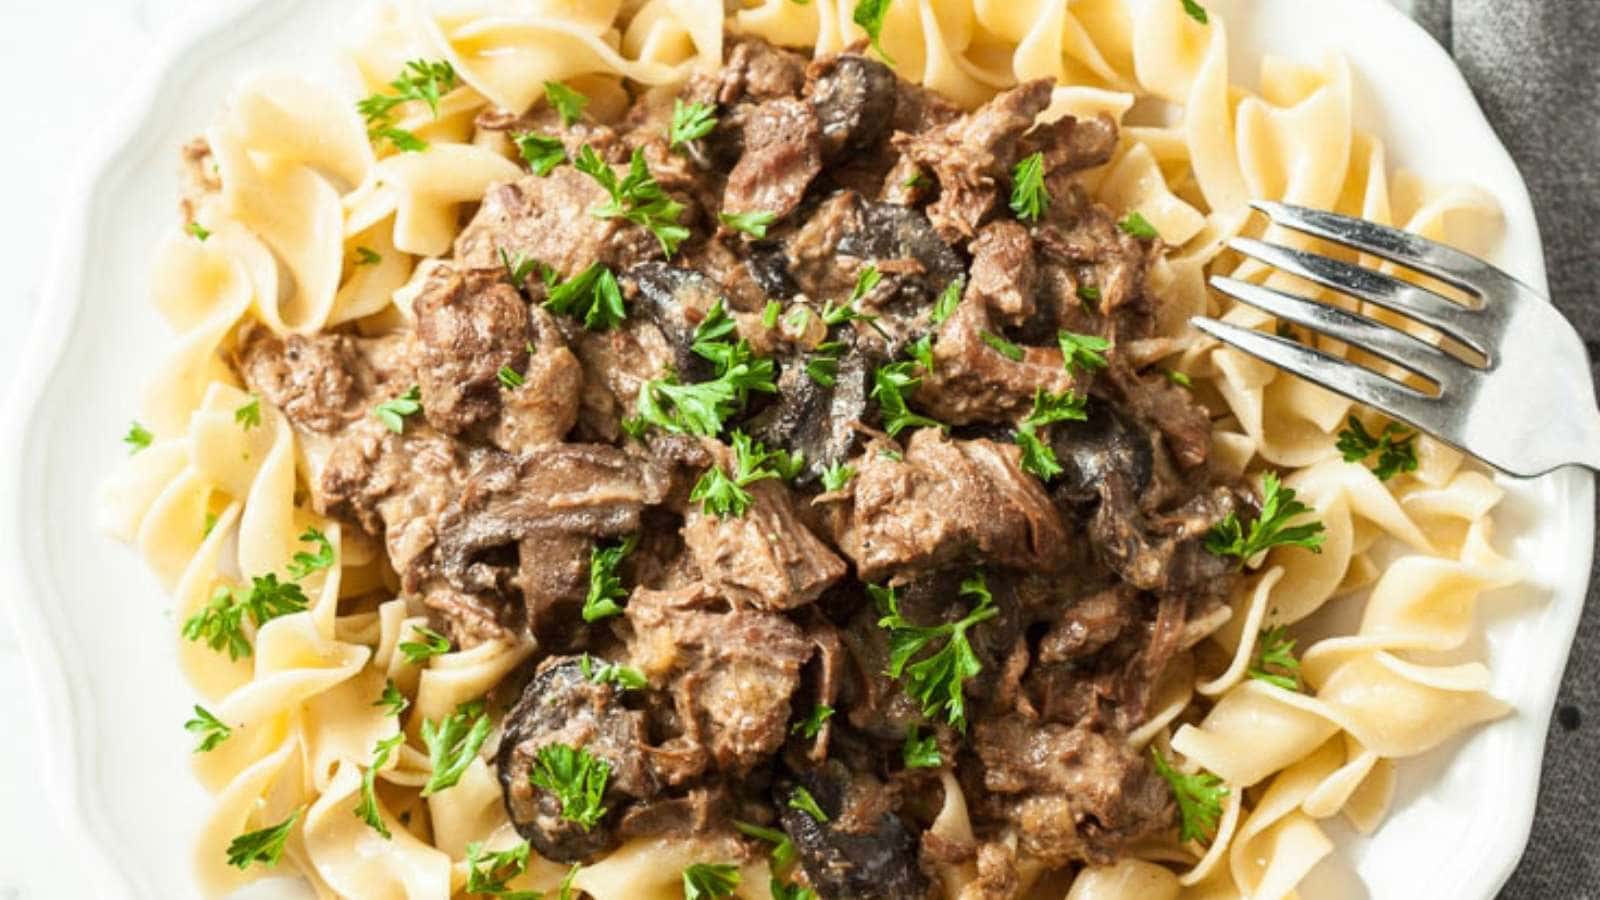 A plate of noodles with meat and mushrooms.